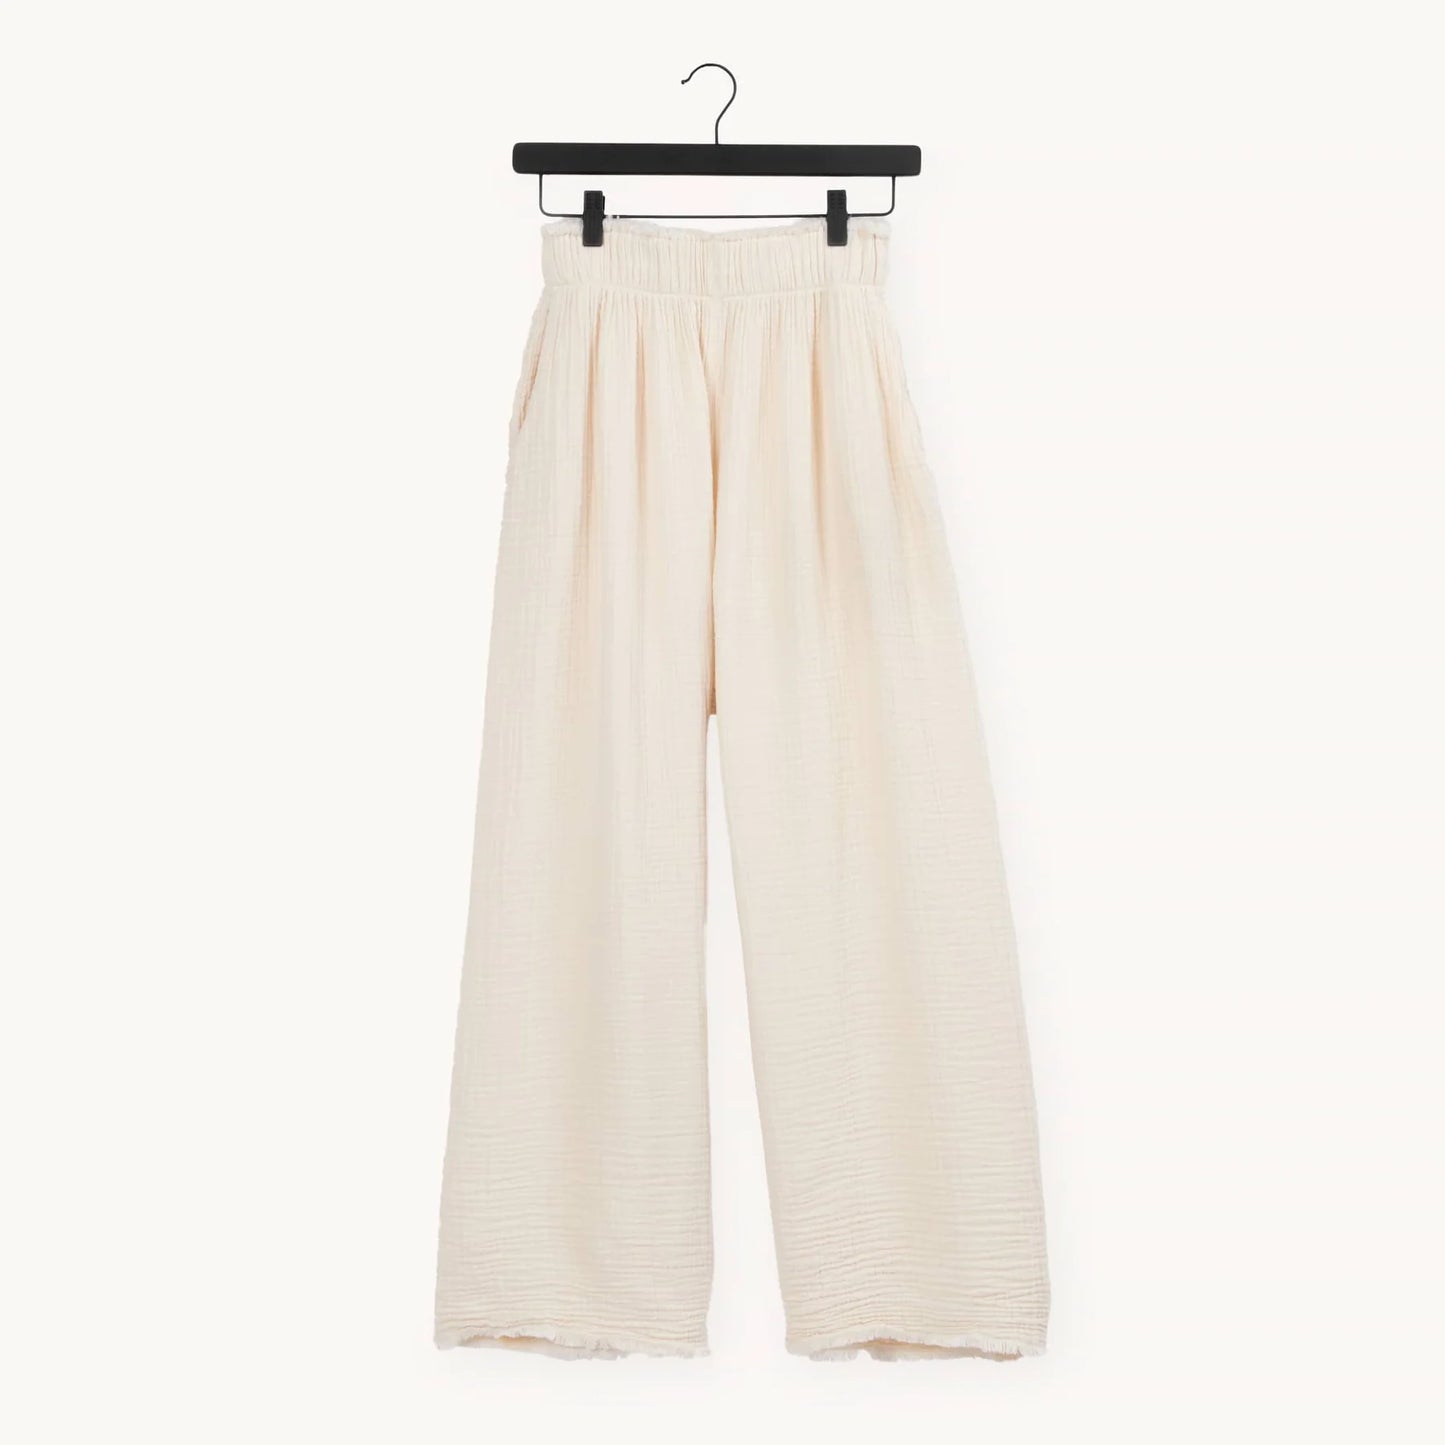 Crinkle Palazzo Pants - One Size in Cream - by Pokoloko